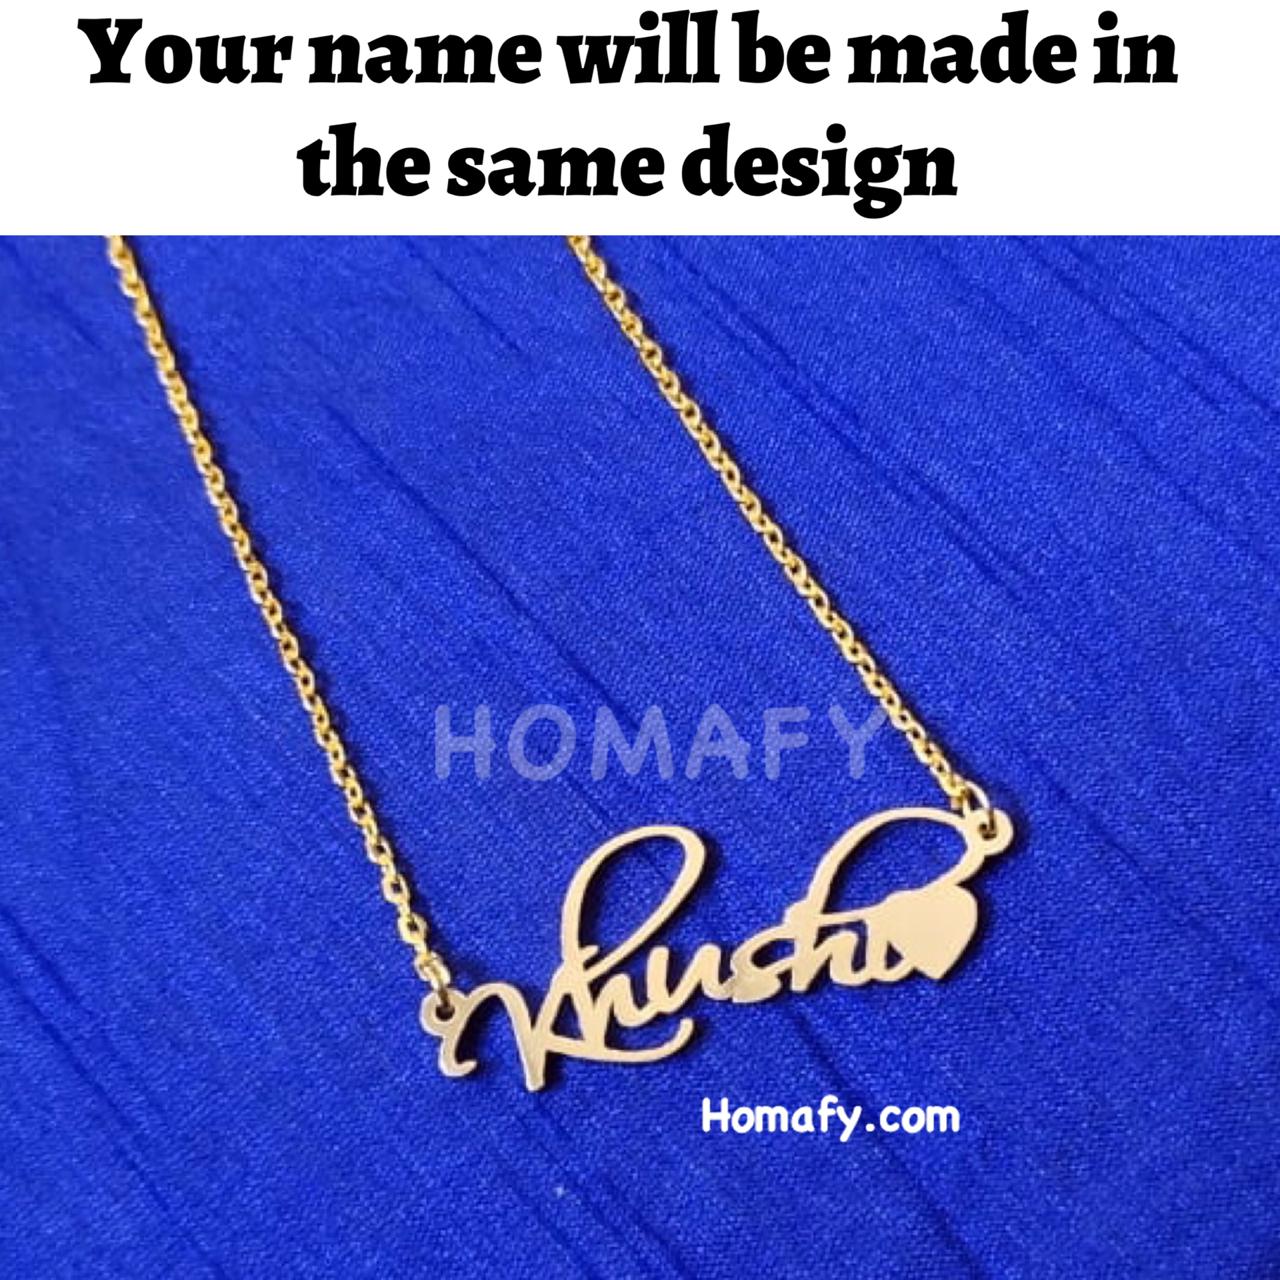 Gold Plated Name Pendant With Heart Homafy